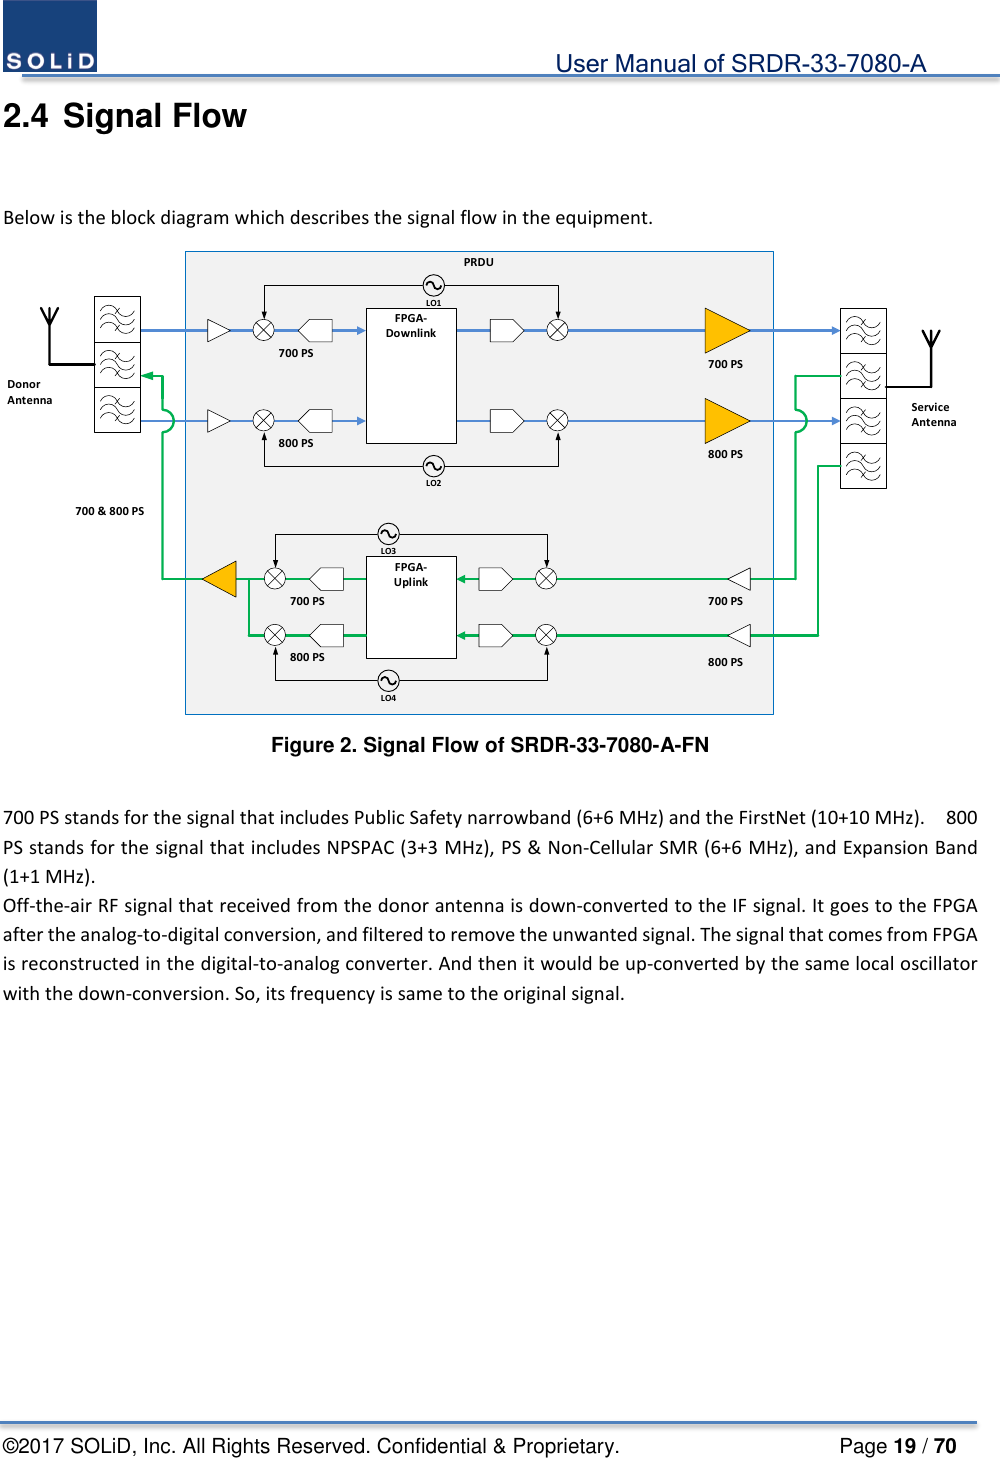                                             User Manual of SRDR-33-7080-A ©2017 SOLiD, Inc. All Rights Reserved. Confidential &amp; Proprietary.                     Page 19 / 70 2.4 Signal Flow  Below is the block diagram which describes the signal flow in the equipment. PRDUFPGA-DownlinkFPGA-UplinkDonor Antenna Service Antenna700 PS800 PS700 &amp; 800 PS700 PS800 PS700 PS800 PSLO1LO2LO3LO4700 PS800 PS Figure 2. Signal Flow of SRDR-33-7080-A-FN  700 PS stands for the signal that includes Public Safety narrowband (6+6 MHz) and the FirstNet (10+10 MHz).    800 PS stands for the signal that includes NPSPAC (3+3 MHz), PS &amp; Non-Cellular SMR (6+6 MHz), and Expansion Band (1+1 MHz).   Off-the-air RF signal that received from the donor antenna is down-converted to the IF signal. It goes to the FPGA after the analog-to-digital conversion, and filtered to remove the unwanted signal. The signal that comes from FPGA is reconstructed in the digital-to-analog converter. And then it would be up-converted by the same local oscillator with the down-conversion. So, its frequency is same to the original signal.  